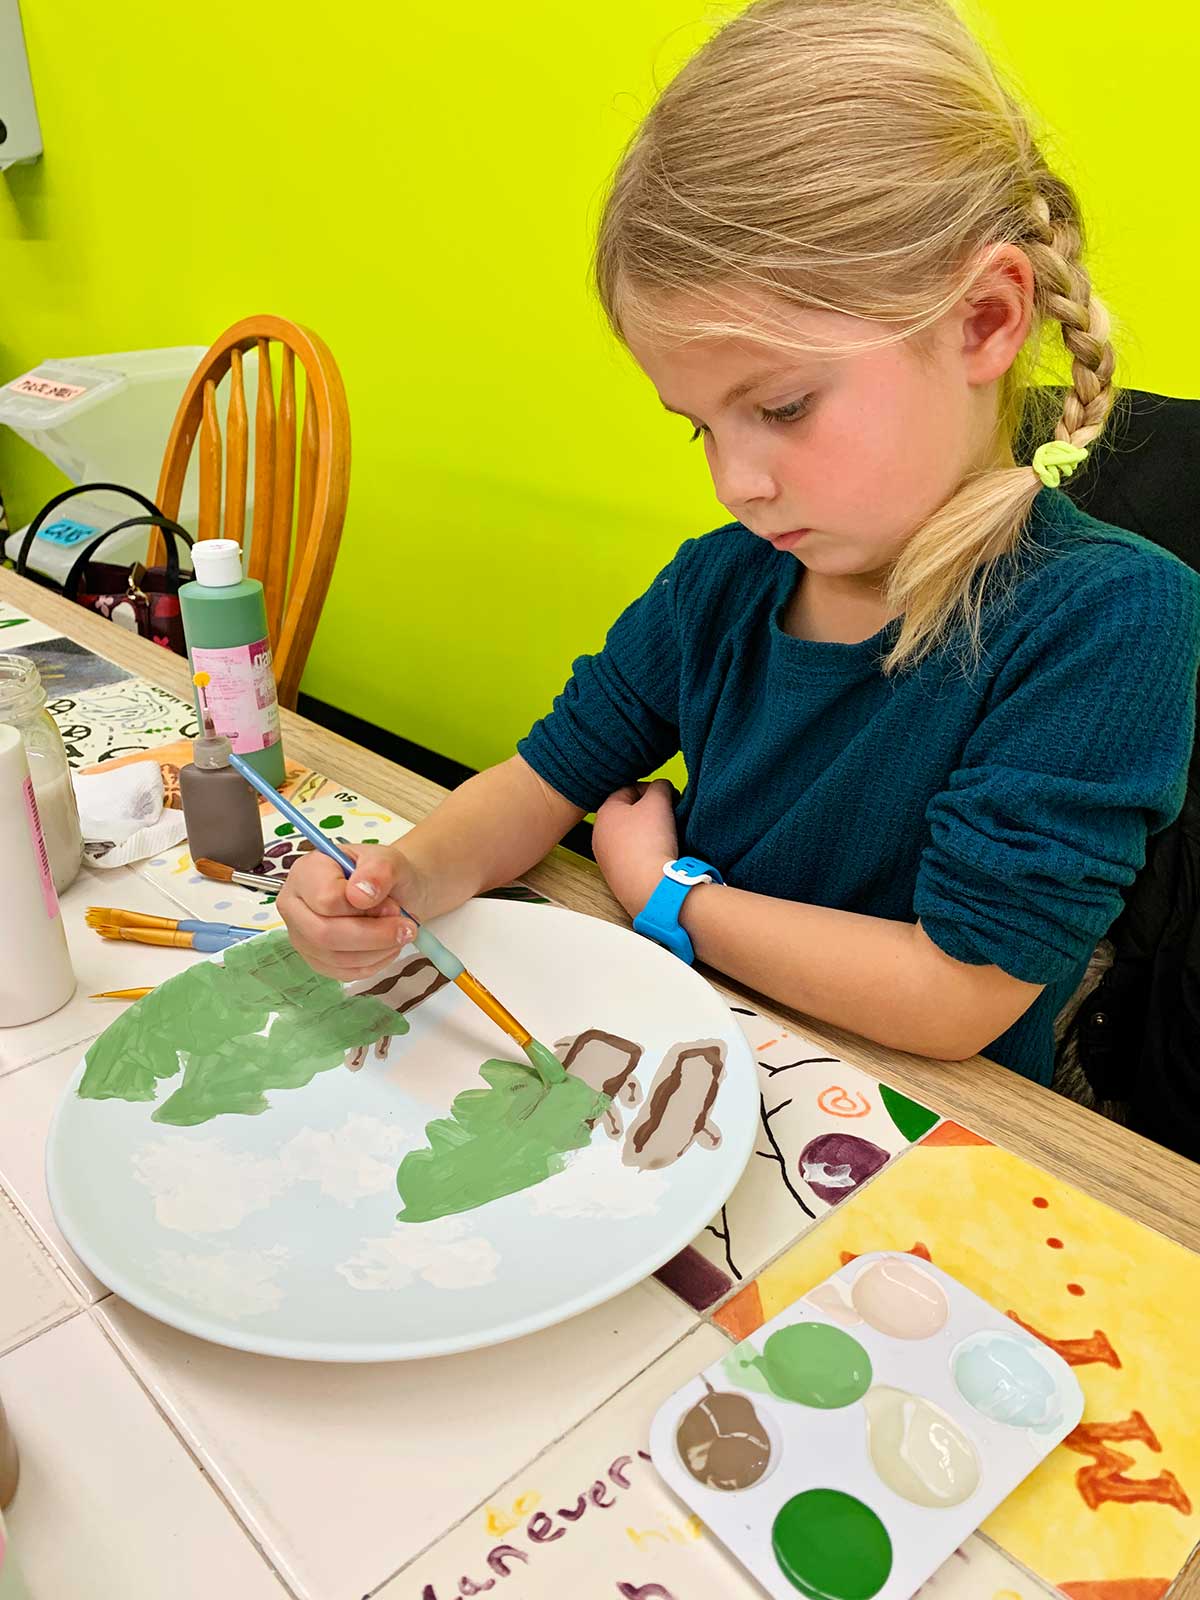 Young girl with blonde hair and braids paints her plate at ceramic painting studio.